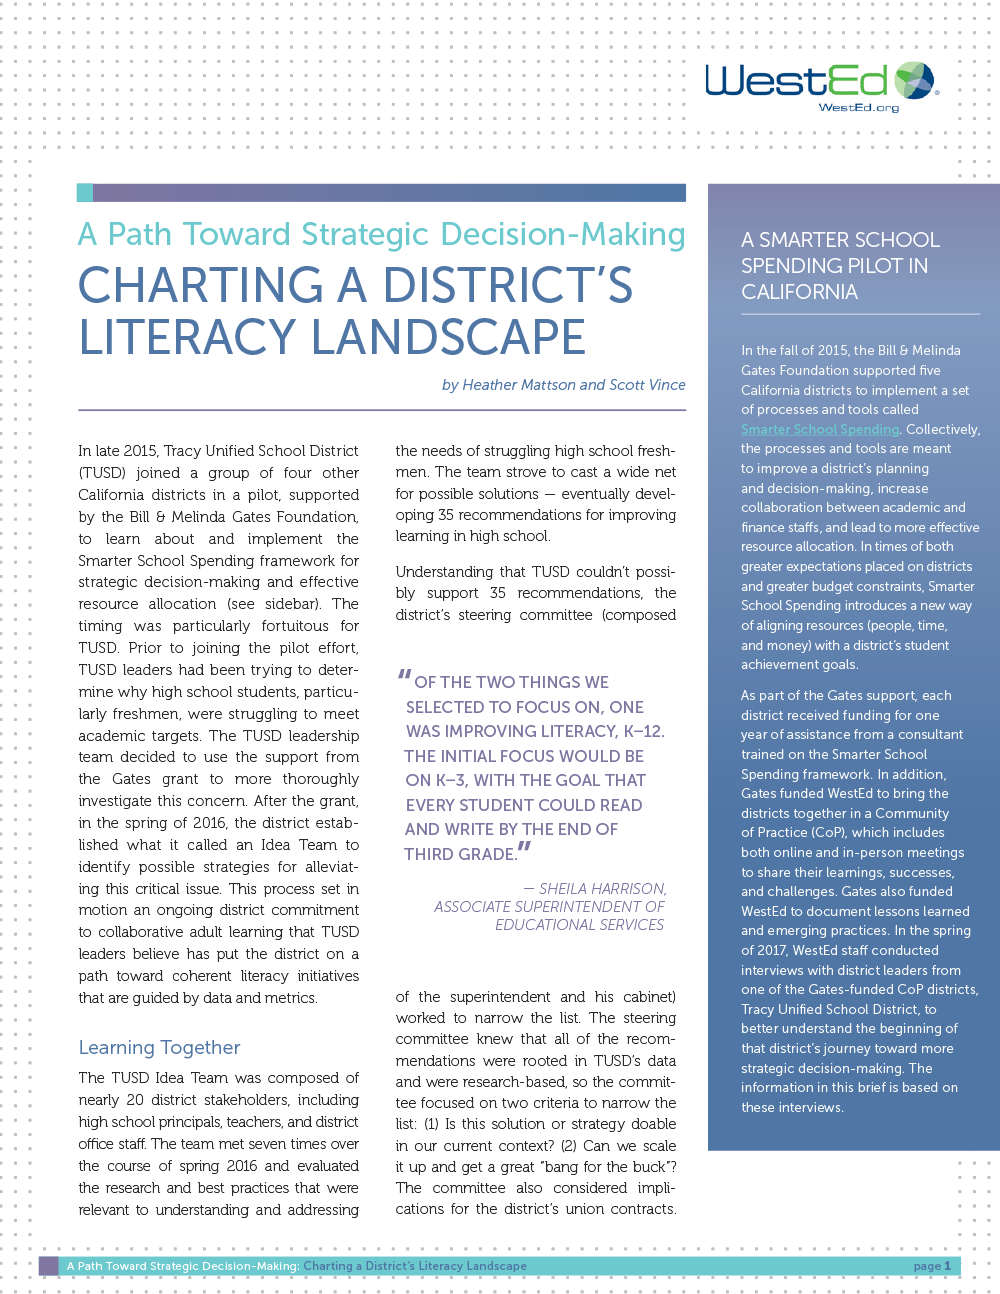 Charting A District's Literacy Landscape: A Path Toward Strategic Decision-Making